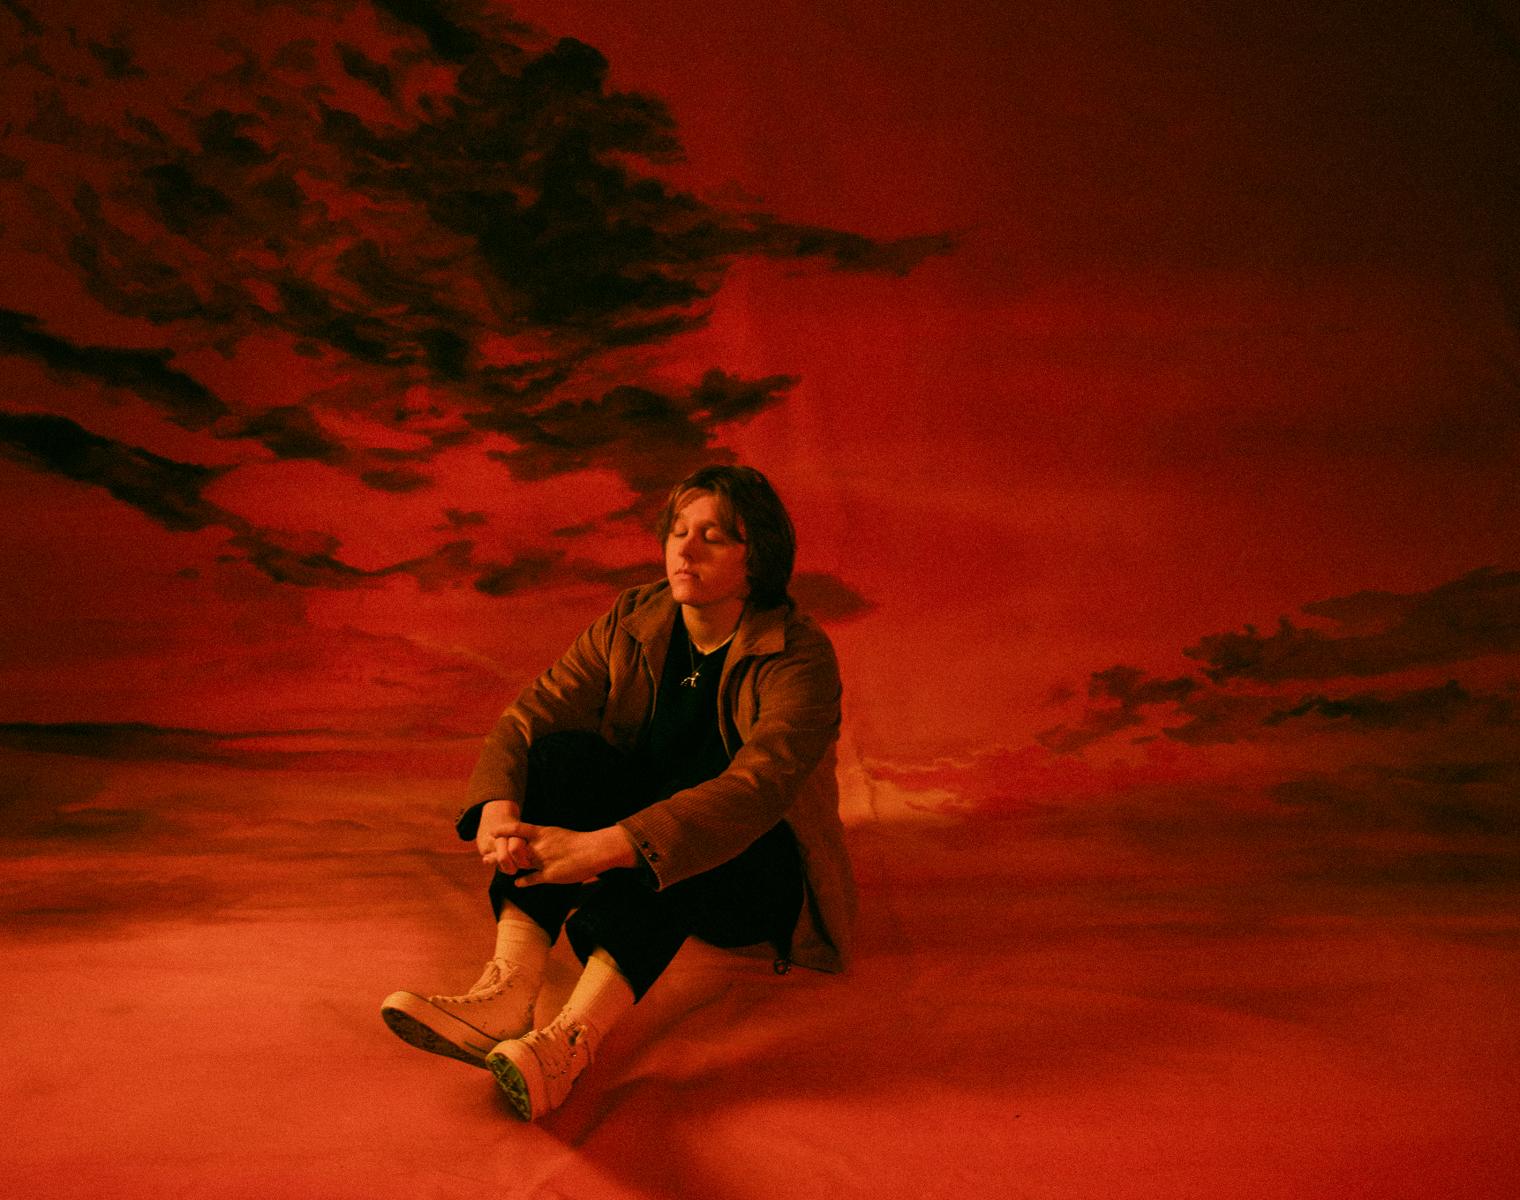 LEWIS CAPALDI - DIVINELY UNINSPIRED TO A HELLISH EXTENT